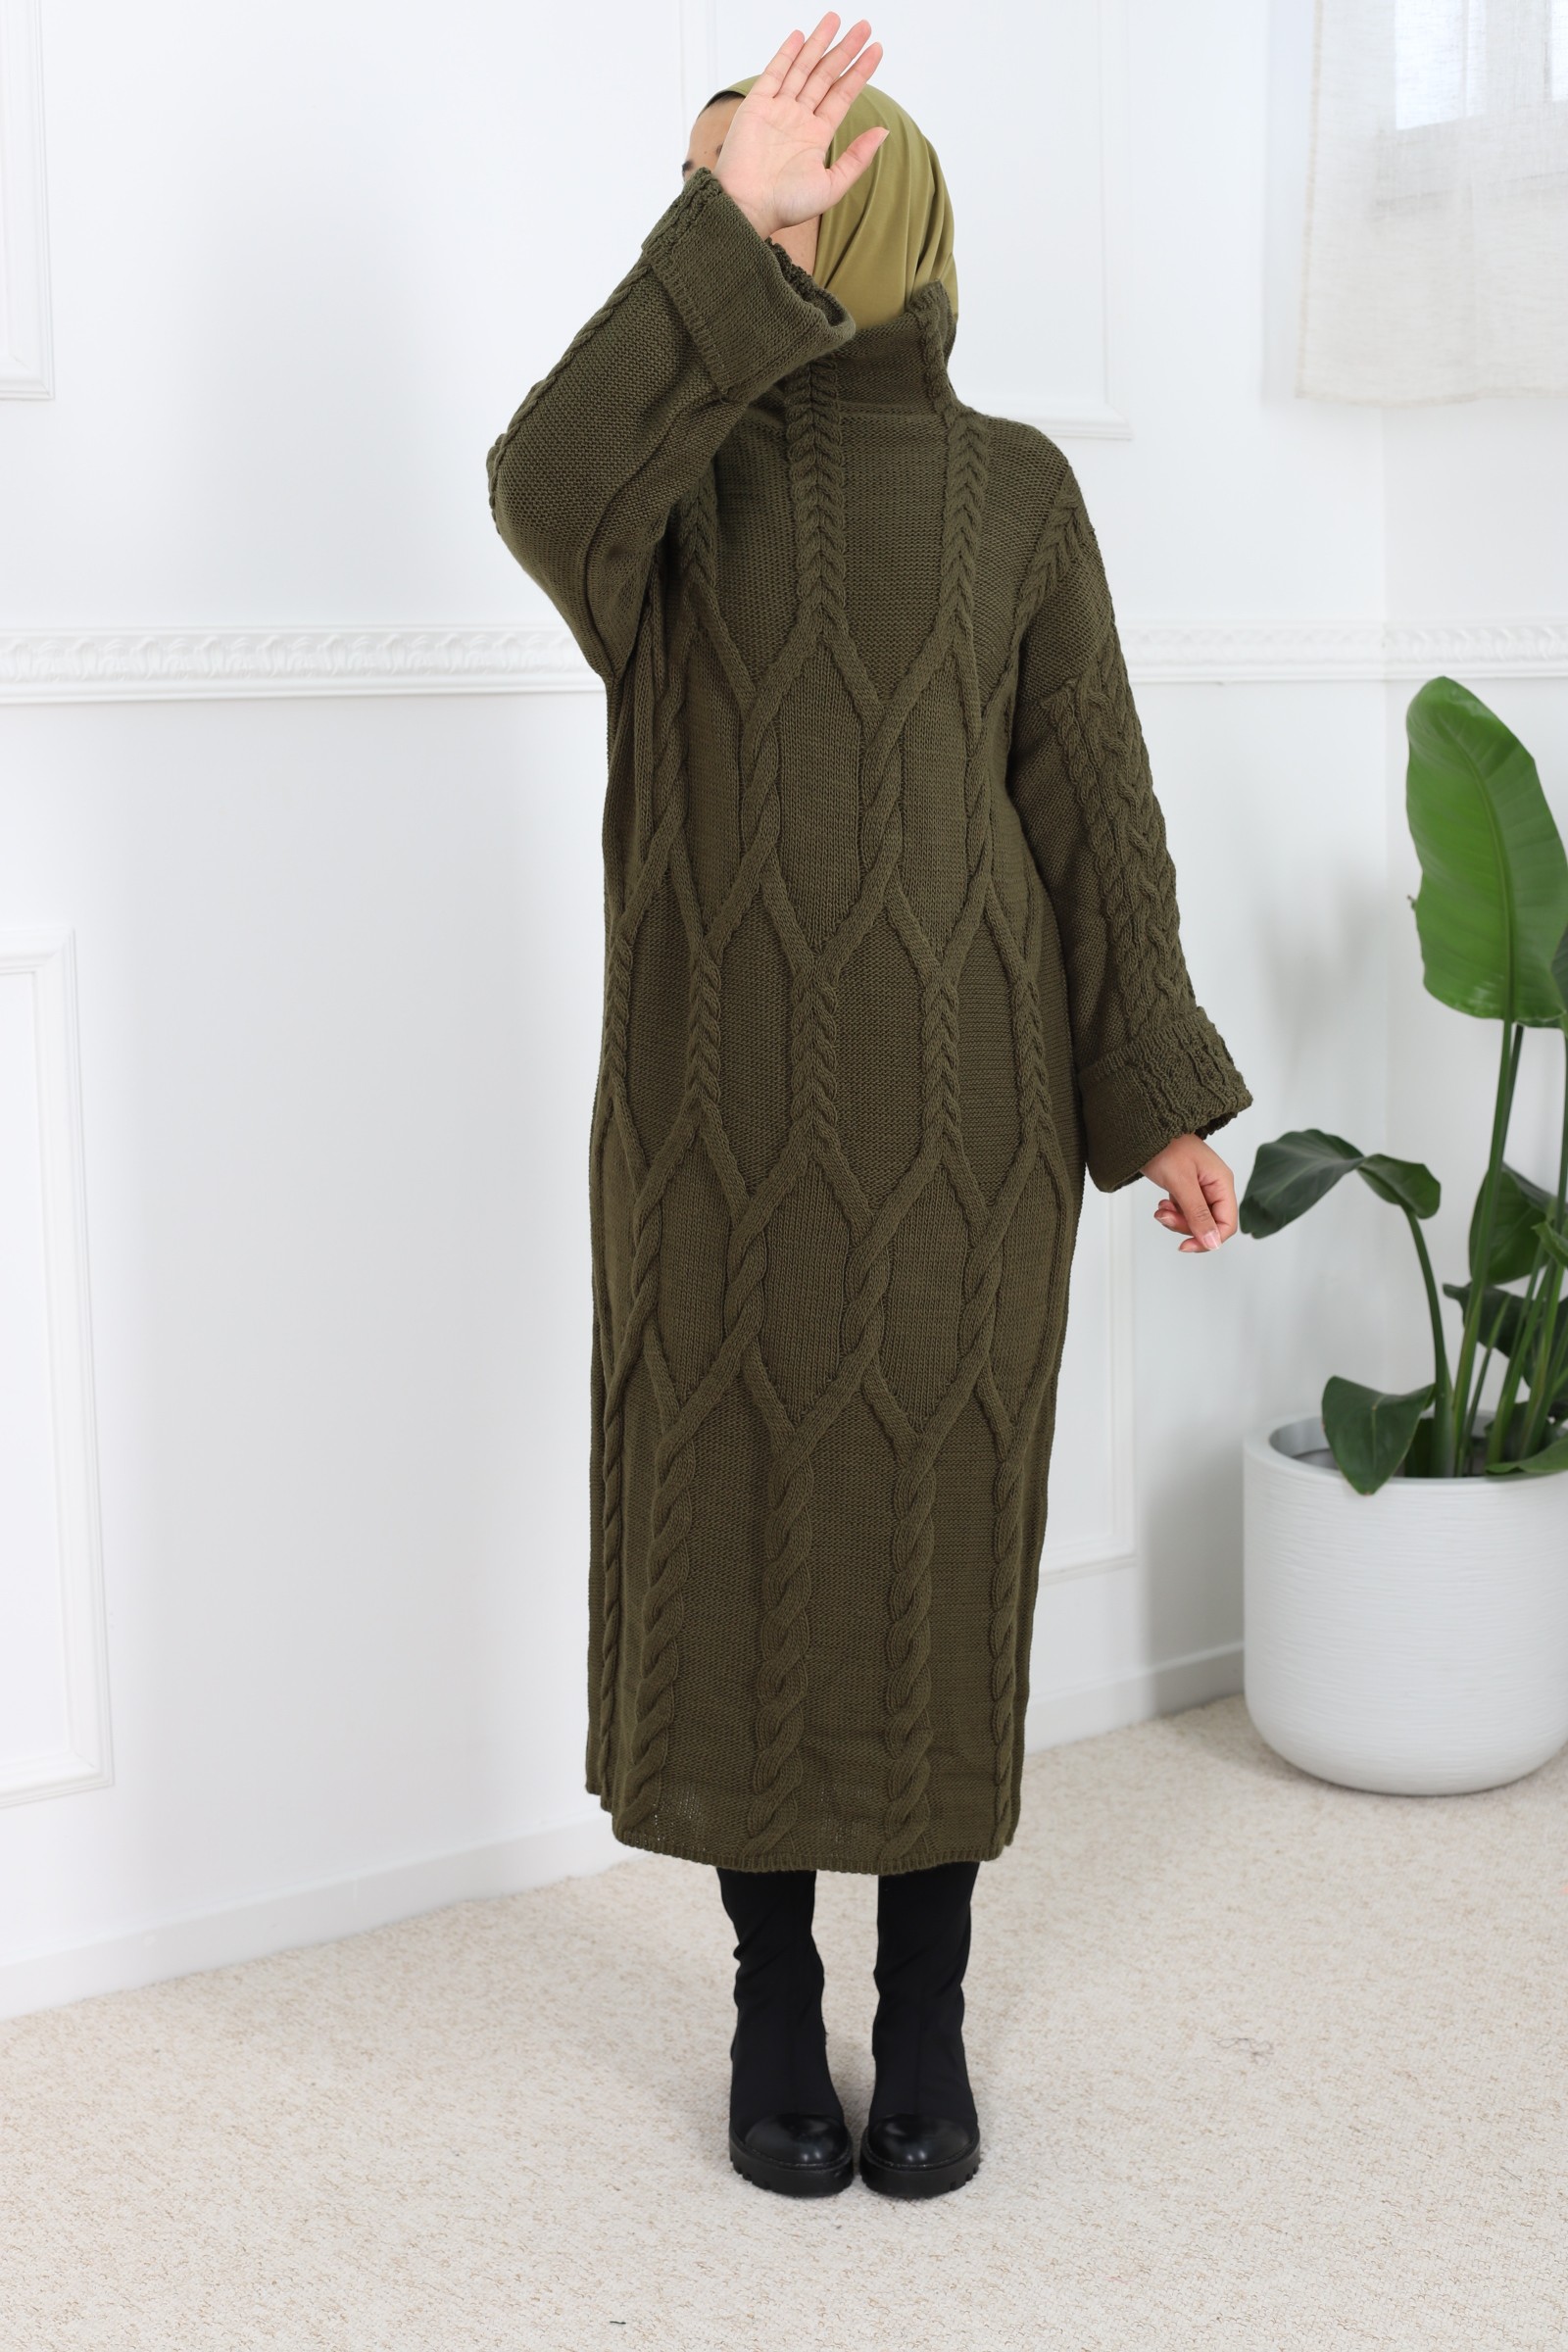 Women's winter cable knit sweater dress